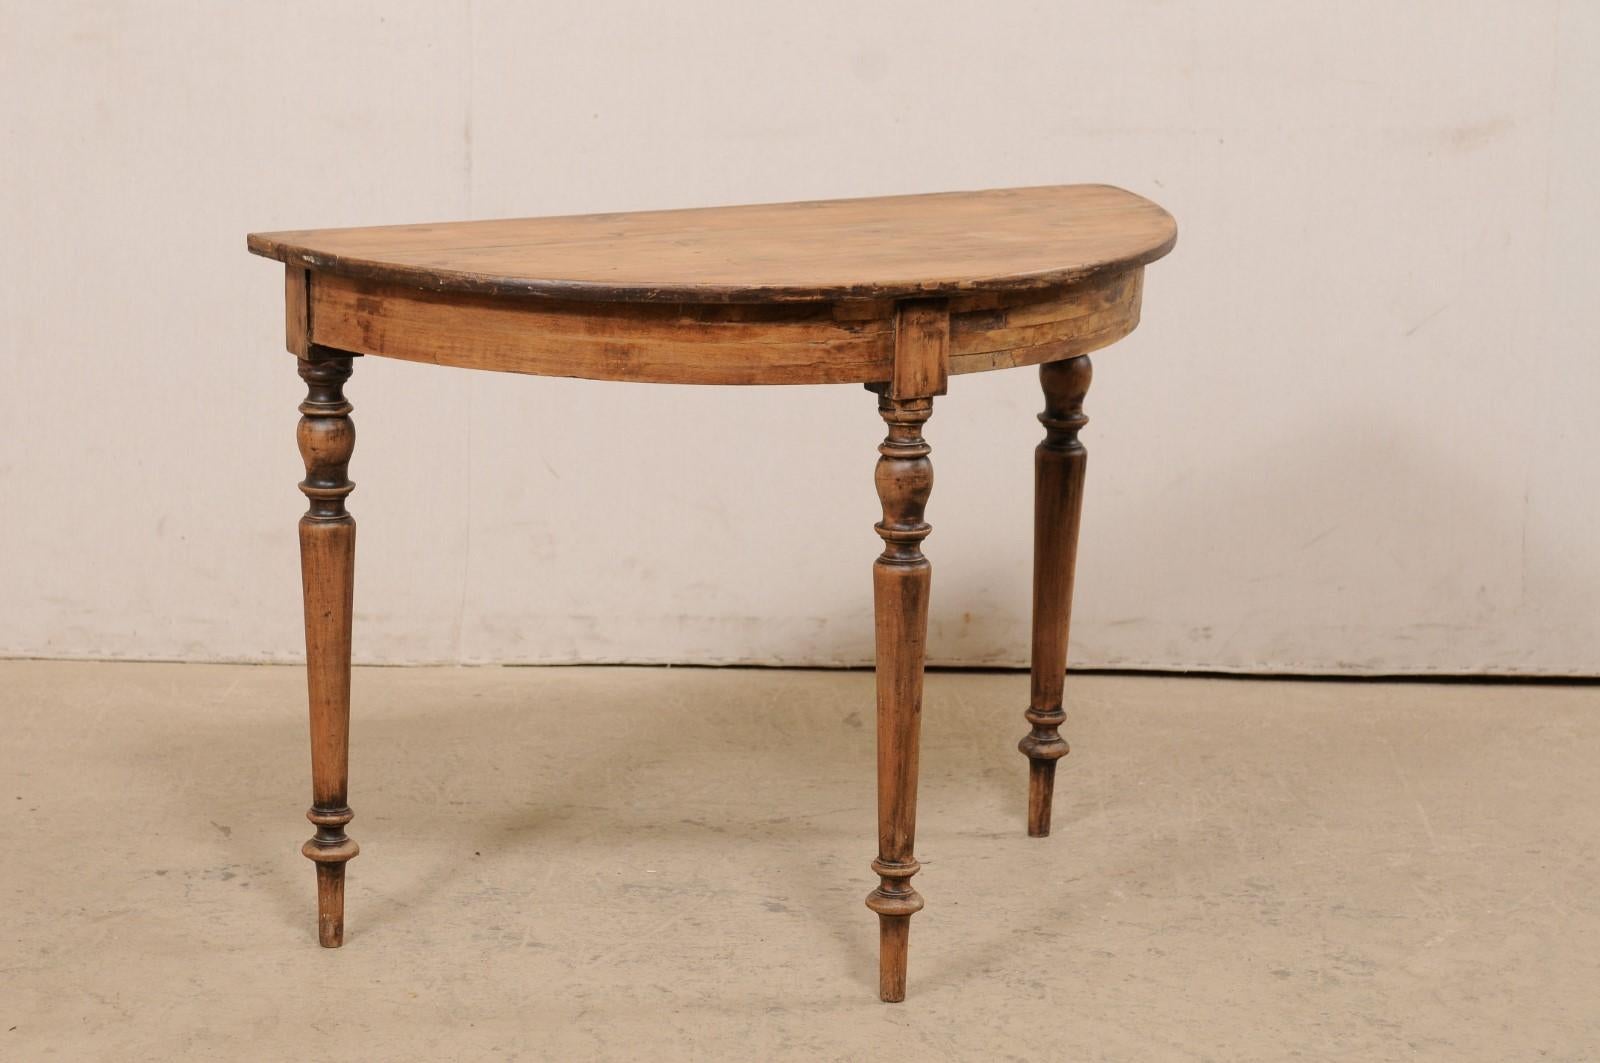 A Swedish carved-wood single demi-lune table from the 19th century. This antique demi-lune table from Sweden, circa 1880's, features a semi-circular top over a plain, rounded apron. This table is raised upon three nicely carved/turned rounded legs,